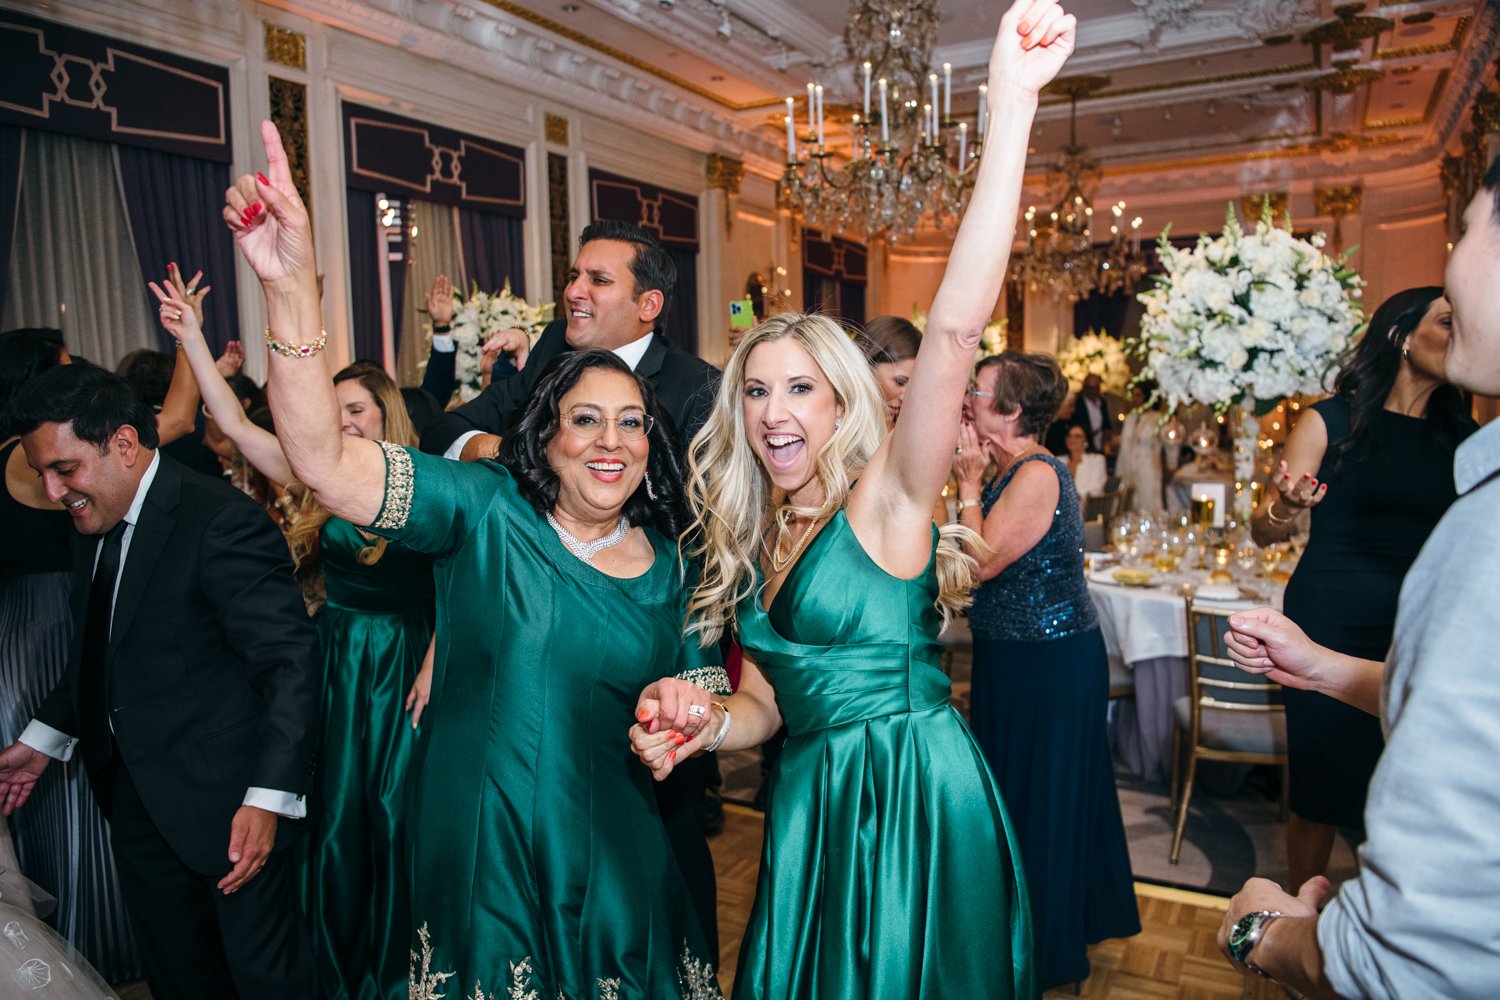 Bridesmaid and wedding guest in green dresses have their hands in the air with big smiles on their faces. The St. Regis ballroom is full of wedding guests behind them.

Manhattan Luxury Wedding. New York Luxury Wedding Photographer. Wedding in Manhattan. NYC Luxury Wedding.